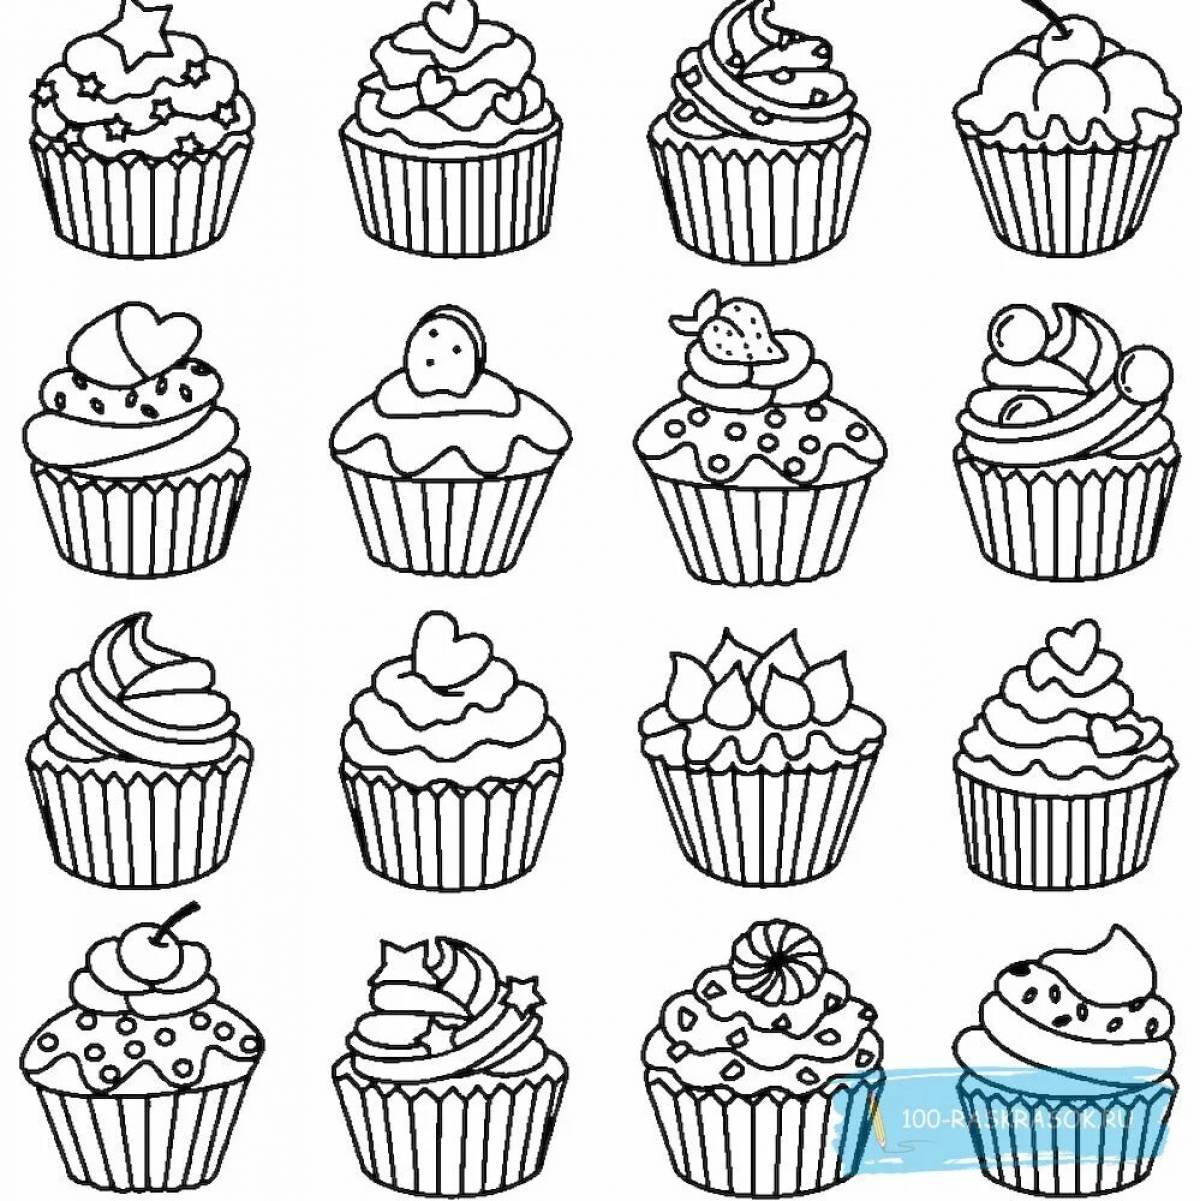 Coloring cupcake with color filling